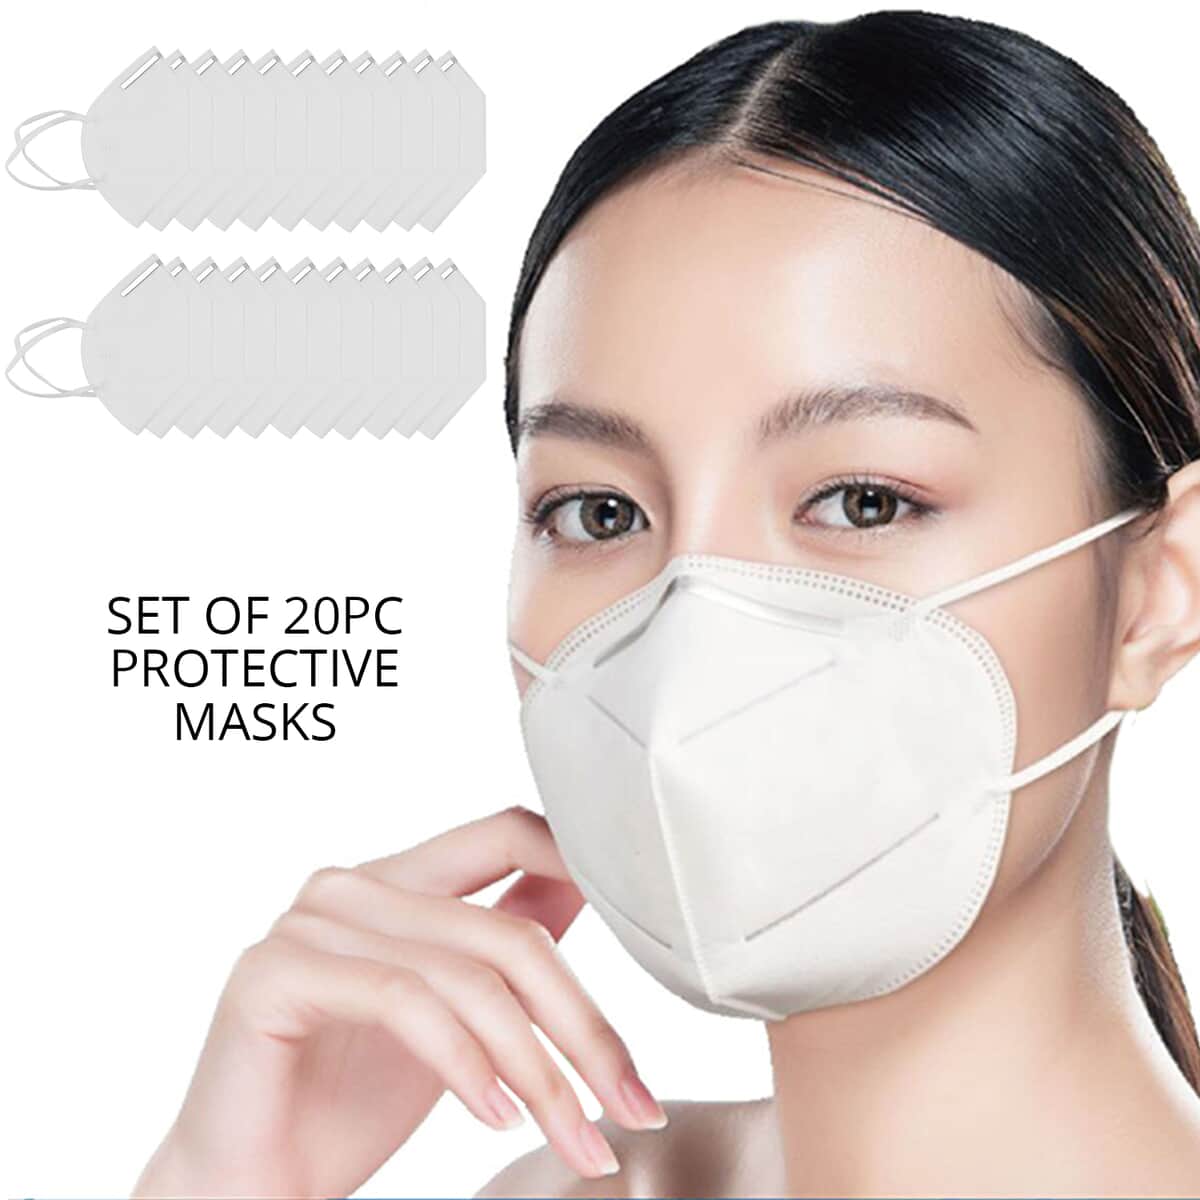 20pc KN95 Protective Masks 5 Layer (Non Returnable) image number 1